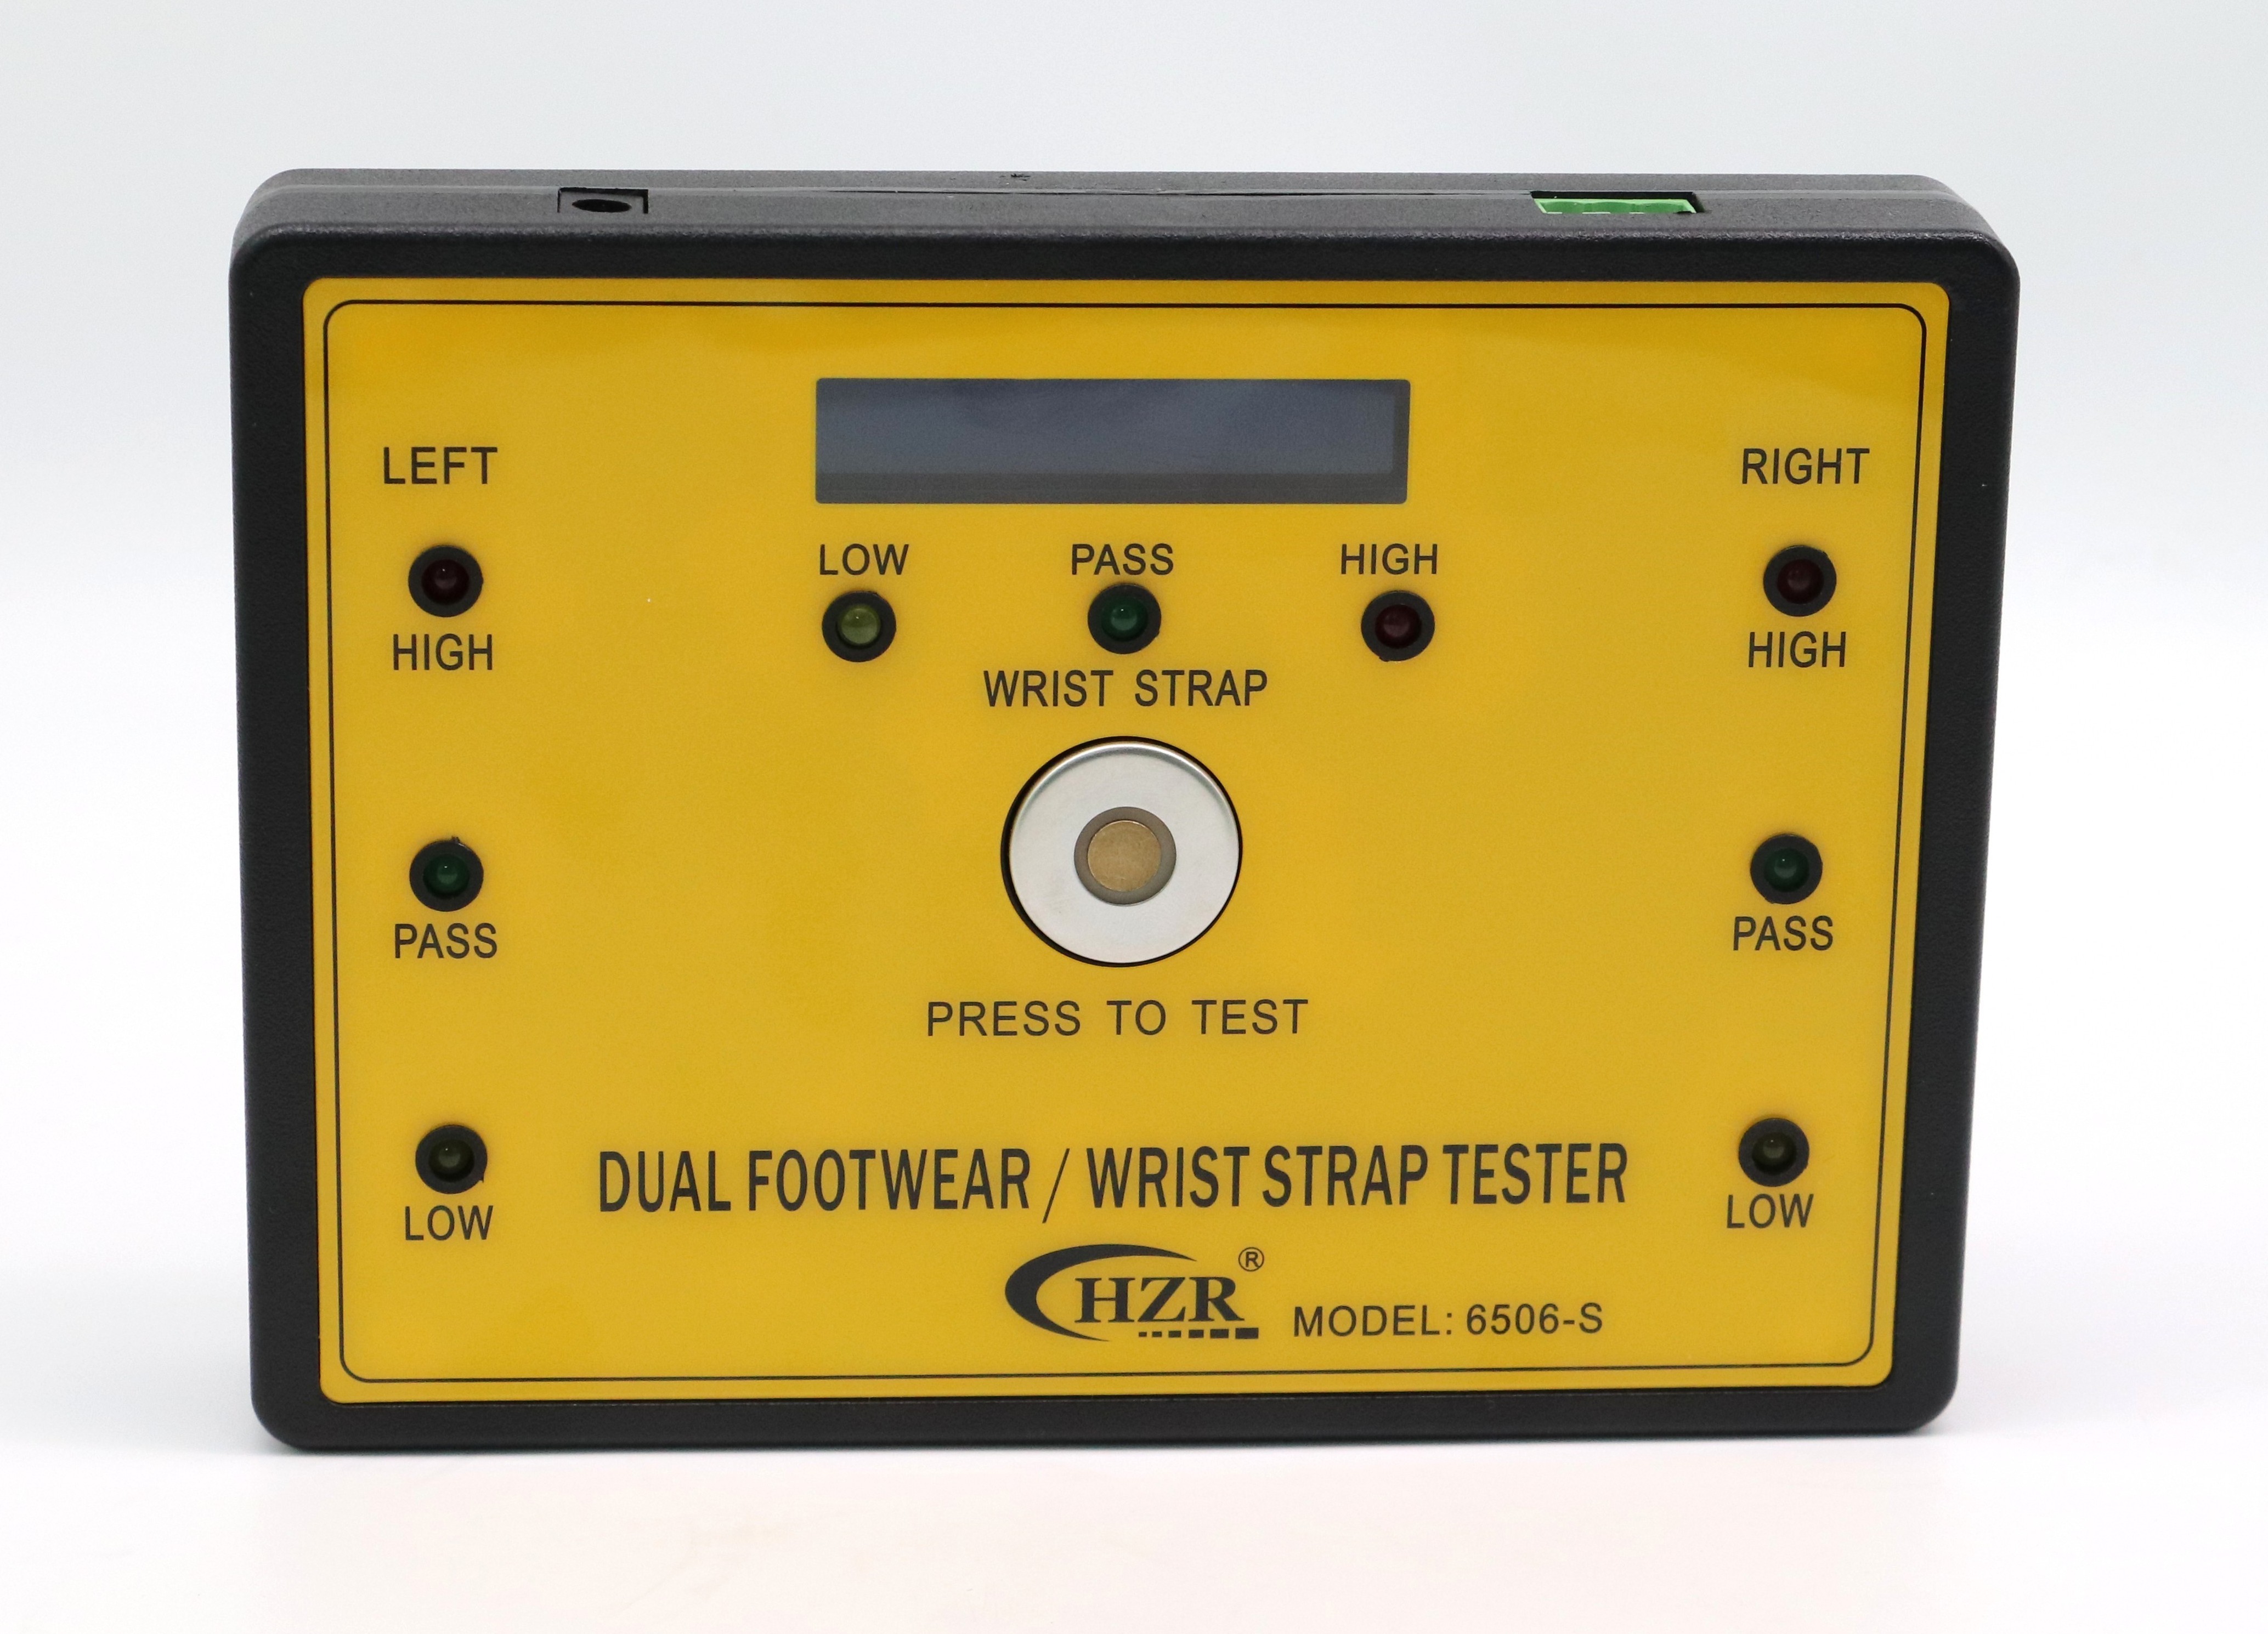 ESD Table Mat Surface Resistance Tester Earth Resistivity Meter